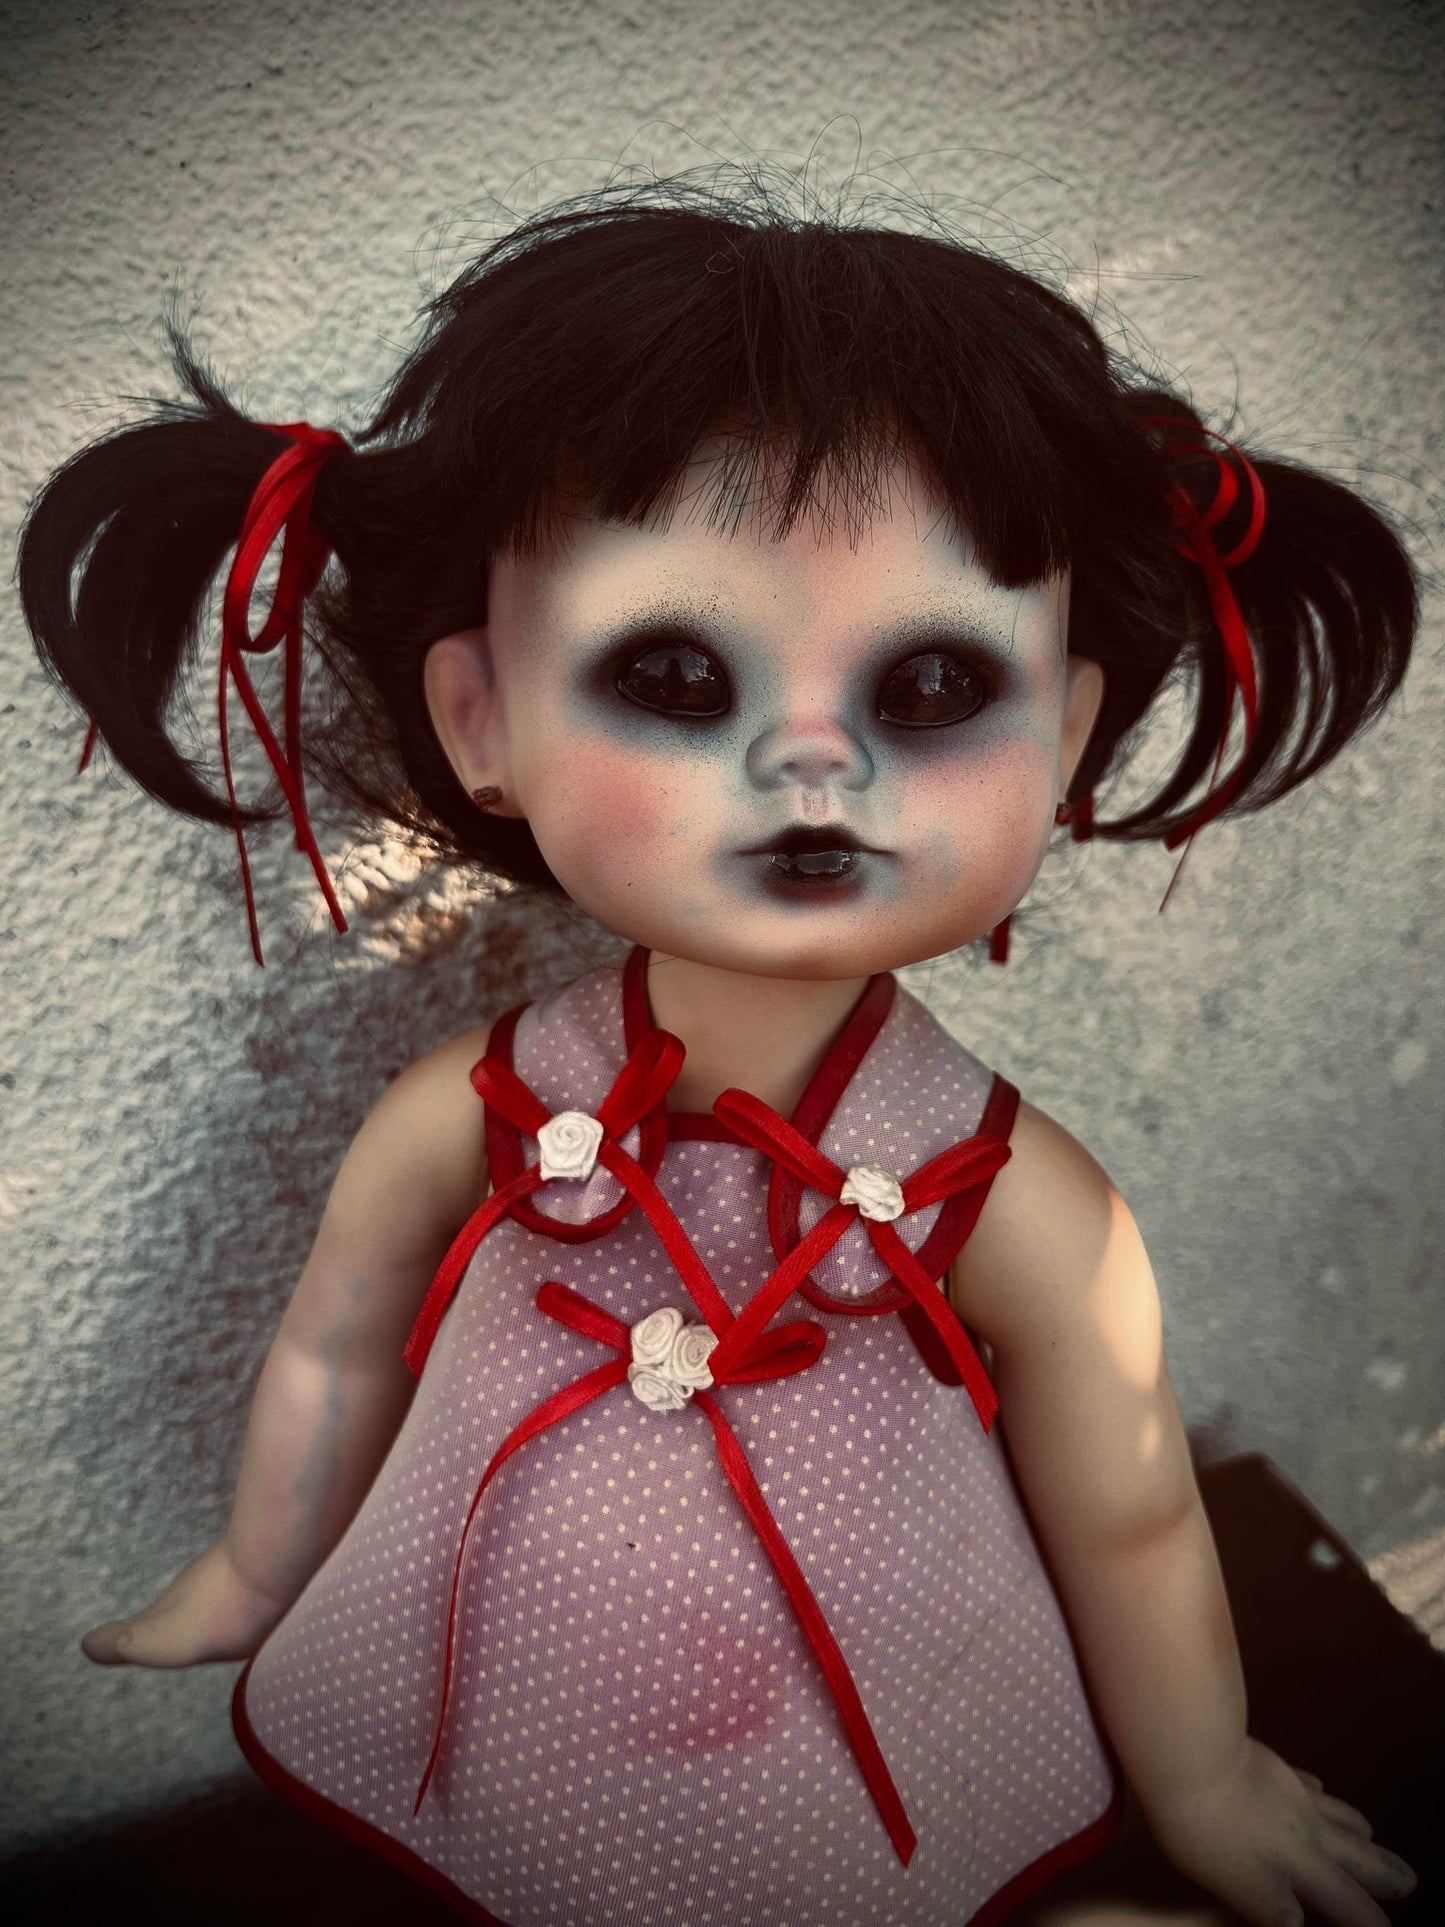 Meet Emily 16" Doll Porcelain Zombie Undead Witchy Creepy Haunted Spirit Infected Scary Spooky Possessed Positive Oddity Gift Idea